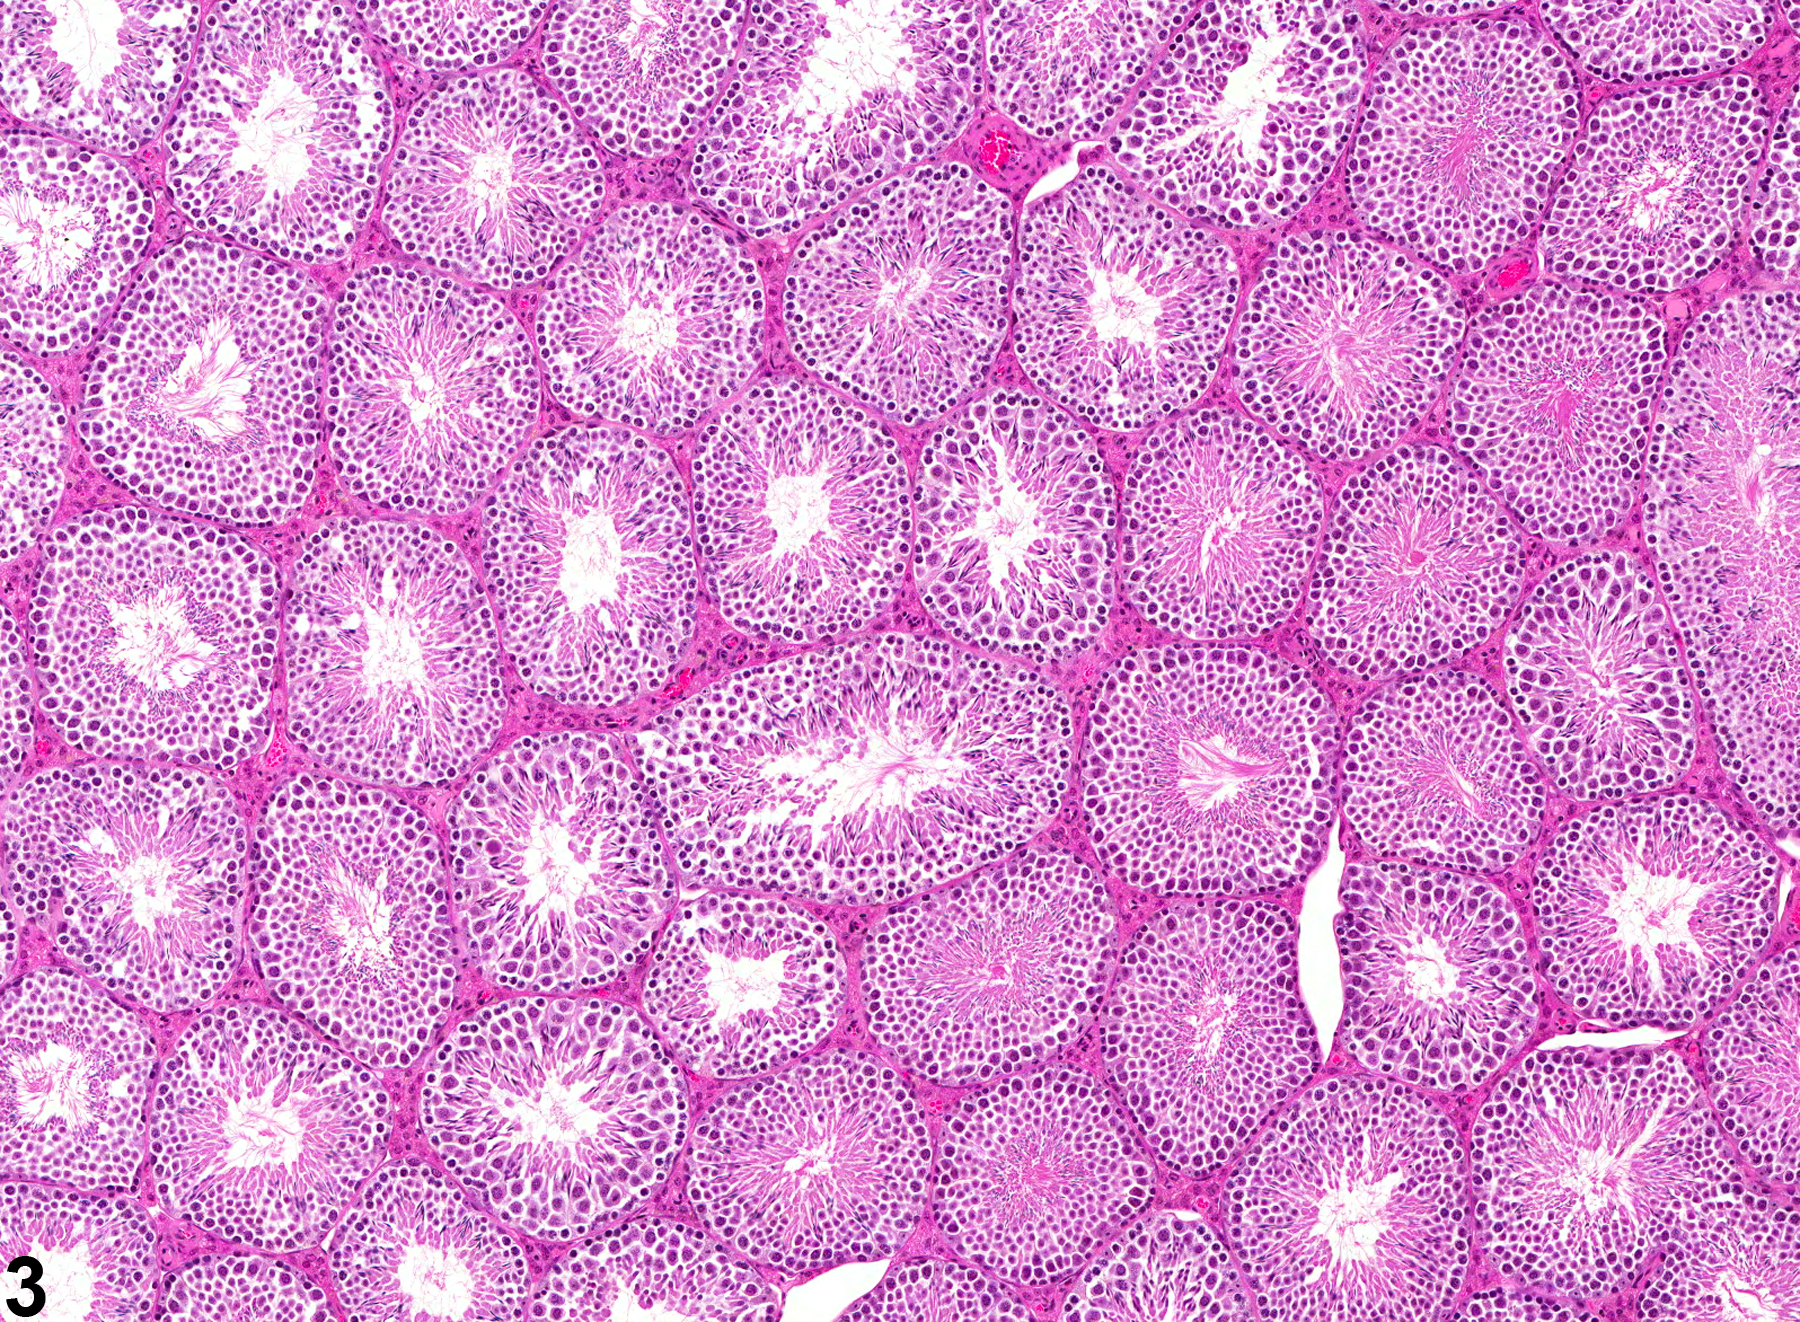 Image of seminiferous tubule normal in the testis from a male B6C3F1 mouse in a chronic study